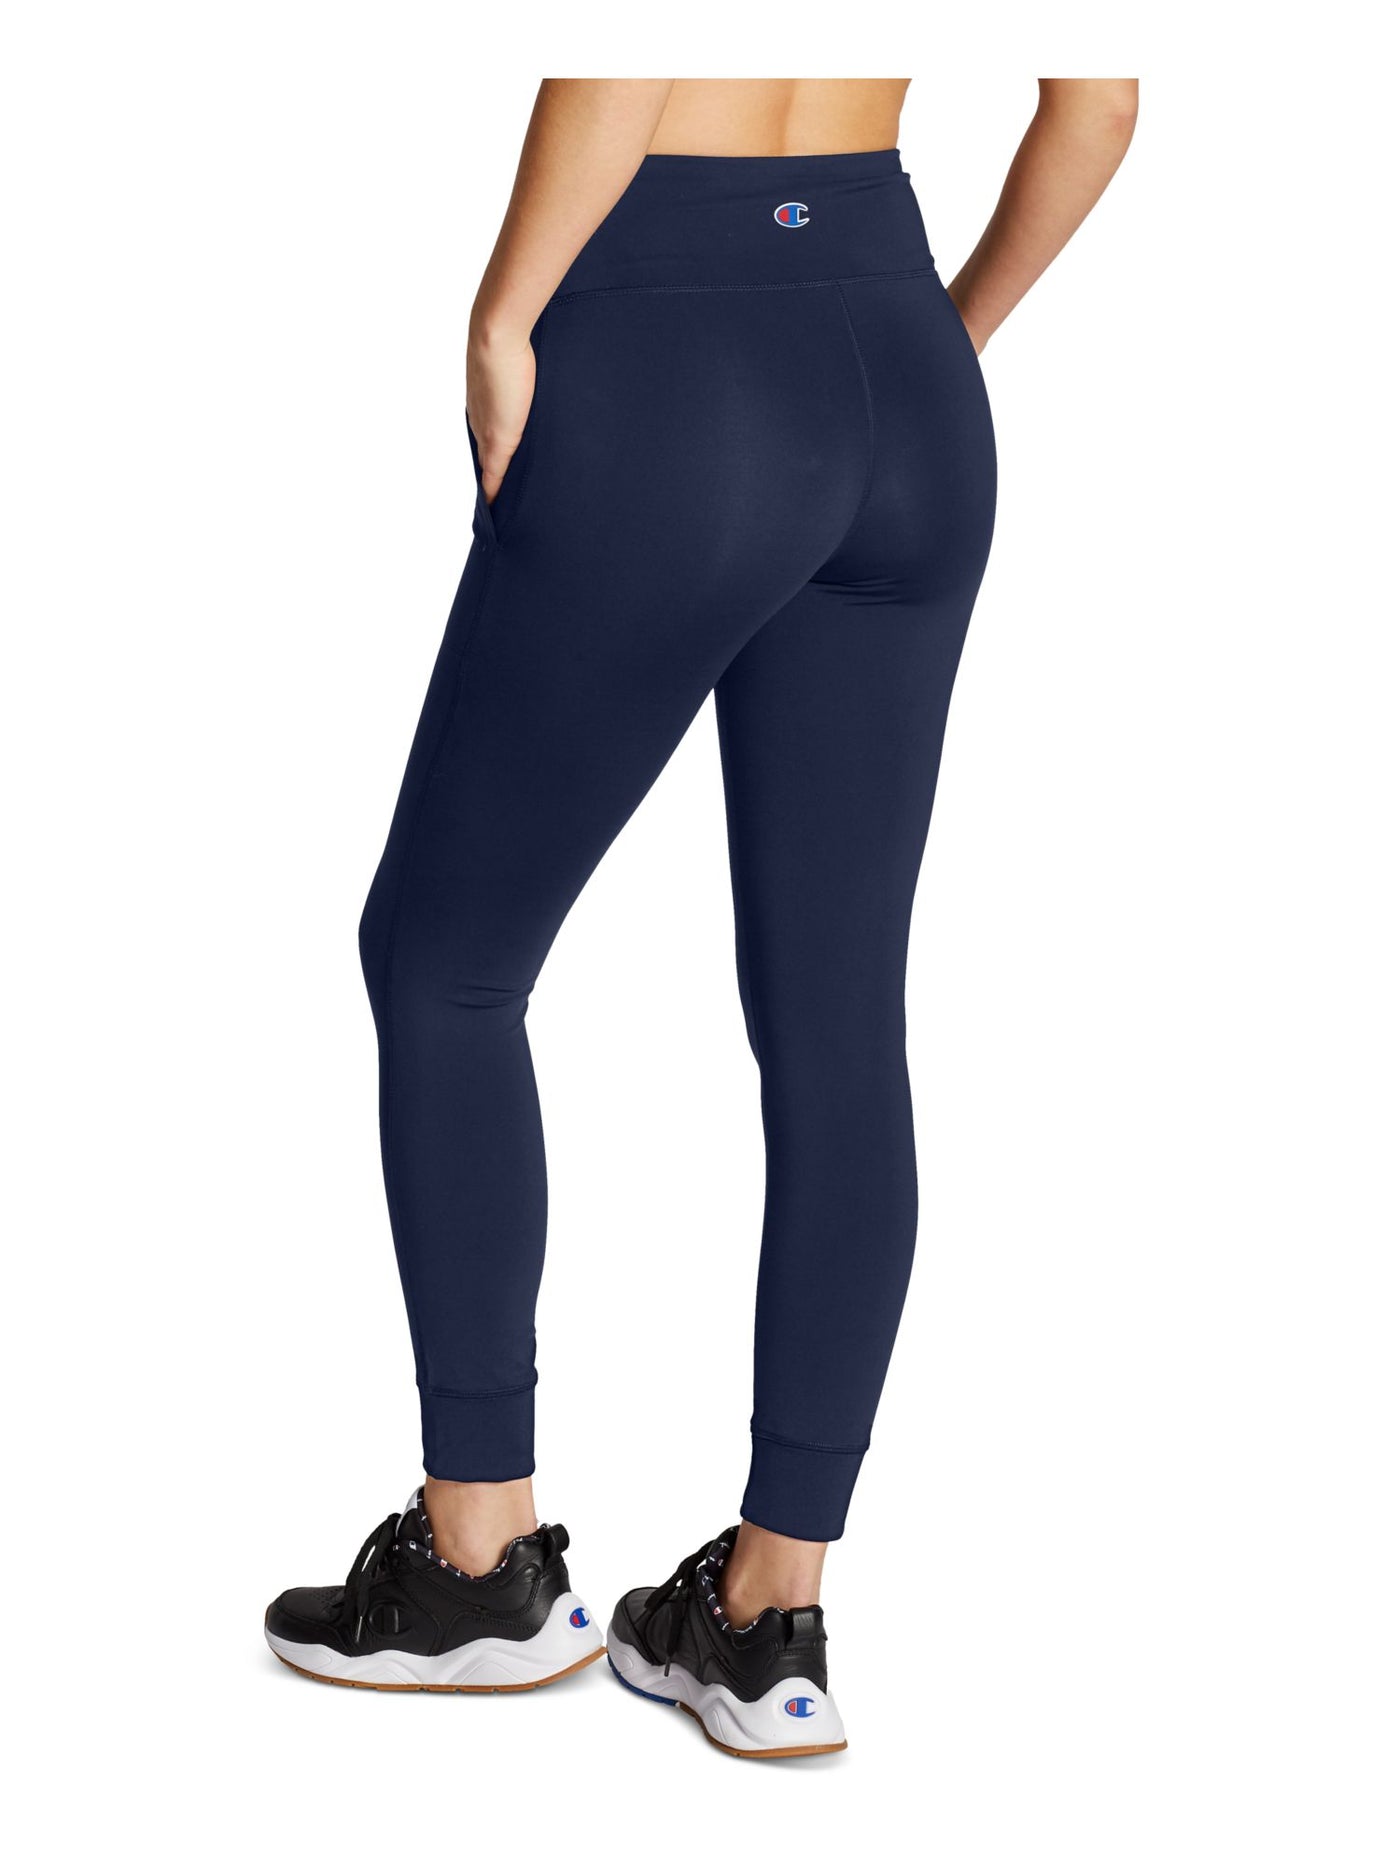 CHAMPION Womens Navy Stretch Moisture Wicking Pocketed Full Length Active Wear Skinny Leggings XS